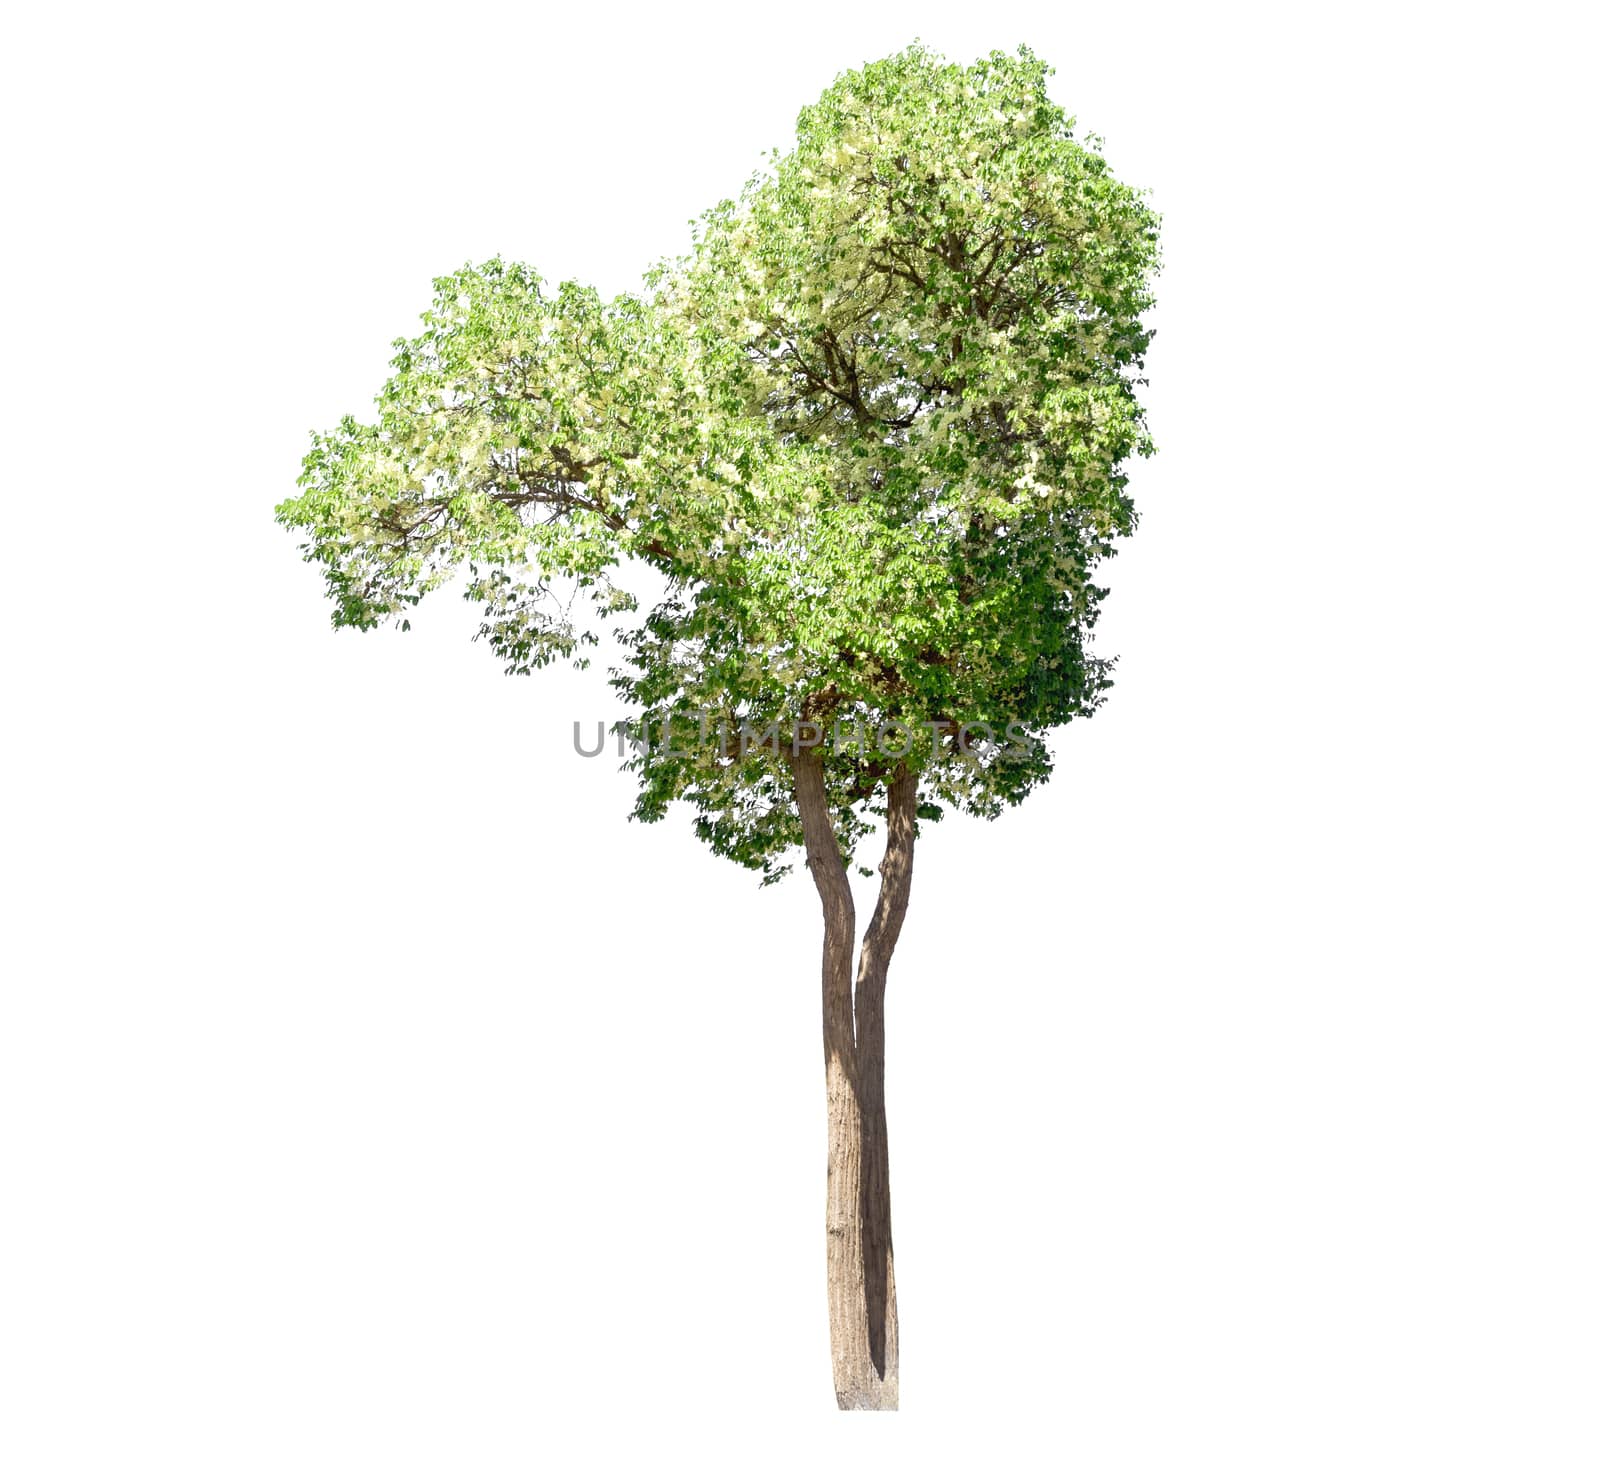 Tree isolated on a white background, tropical trees isolated used for design, with clipping path